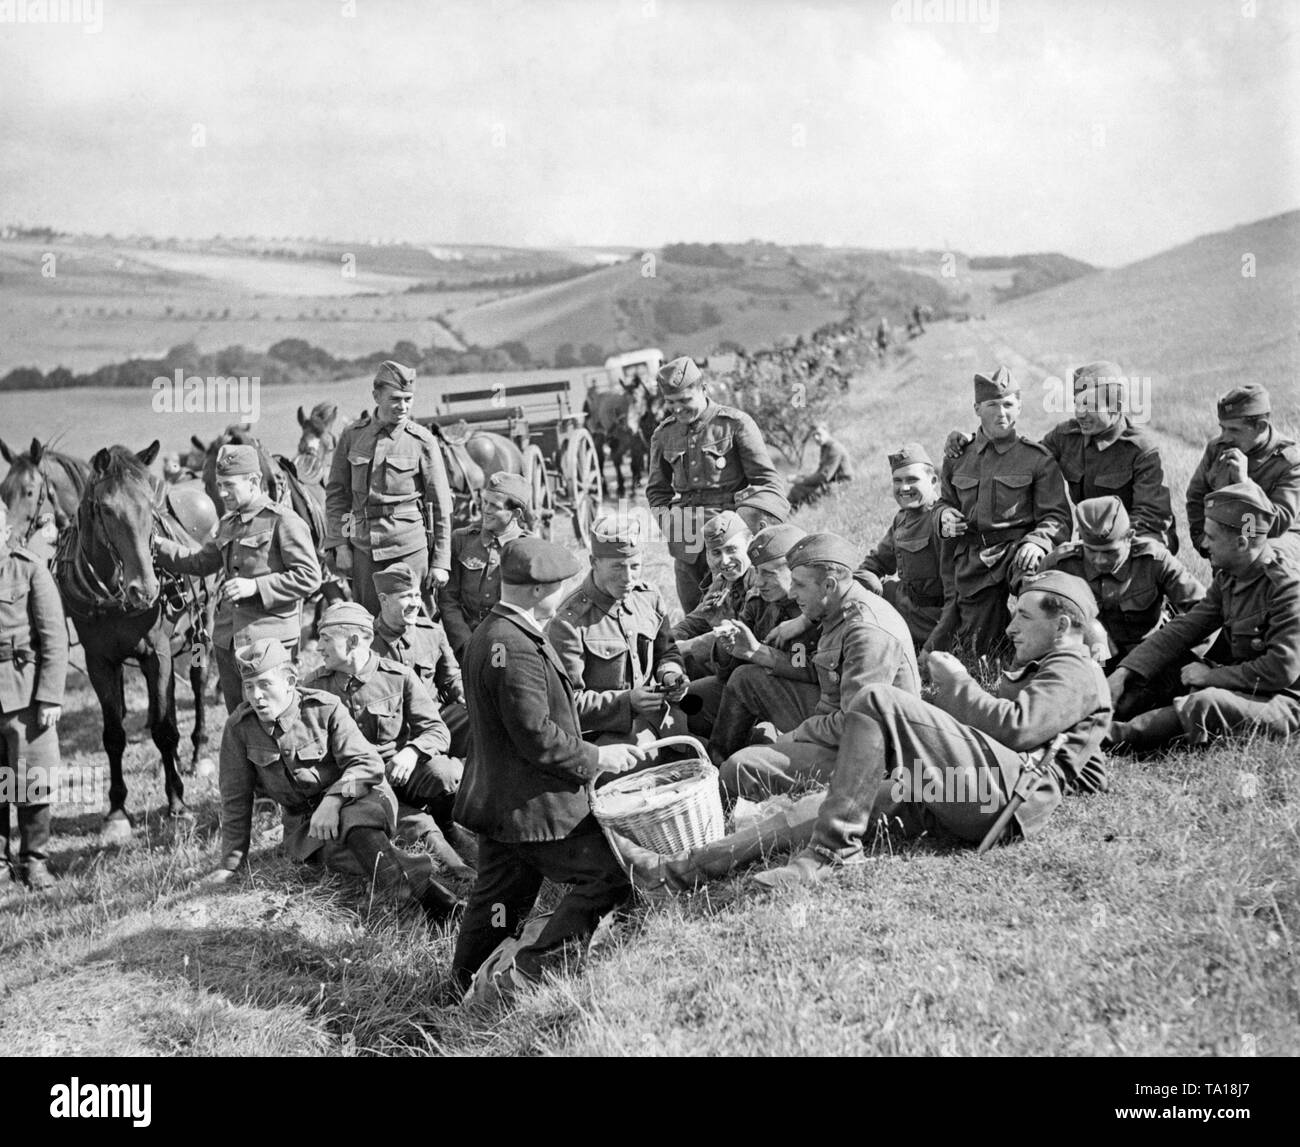 The 1. Prager Regiment (1. Regiment of Prague) during lunch break. In the Sudetenland crisis, the mobilization of the Czechoslovak Army takes place. Stock Photo